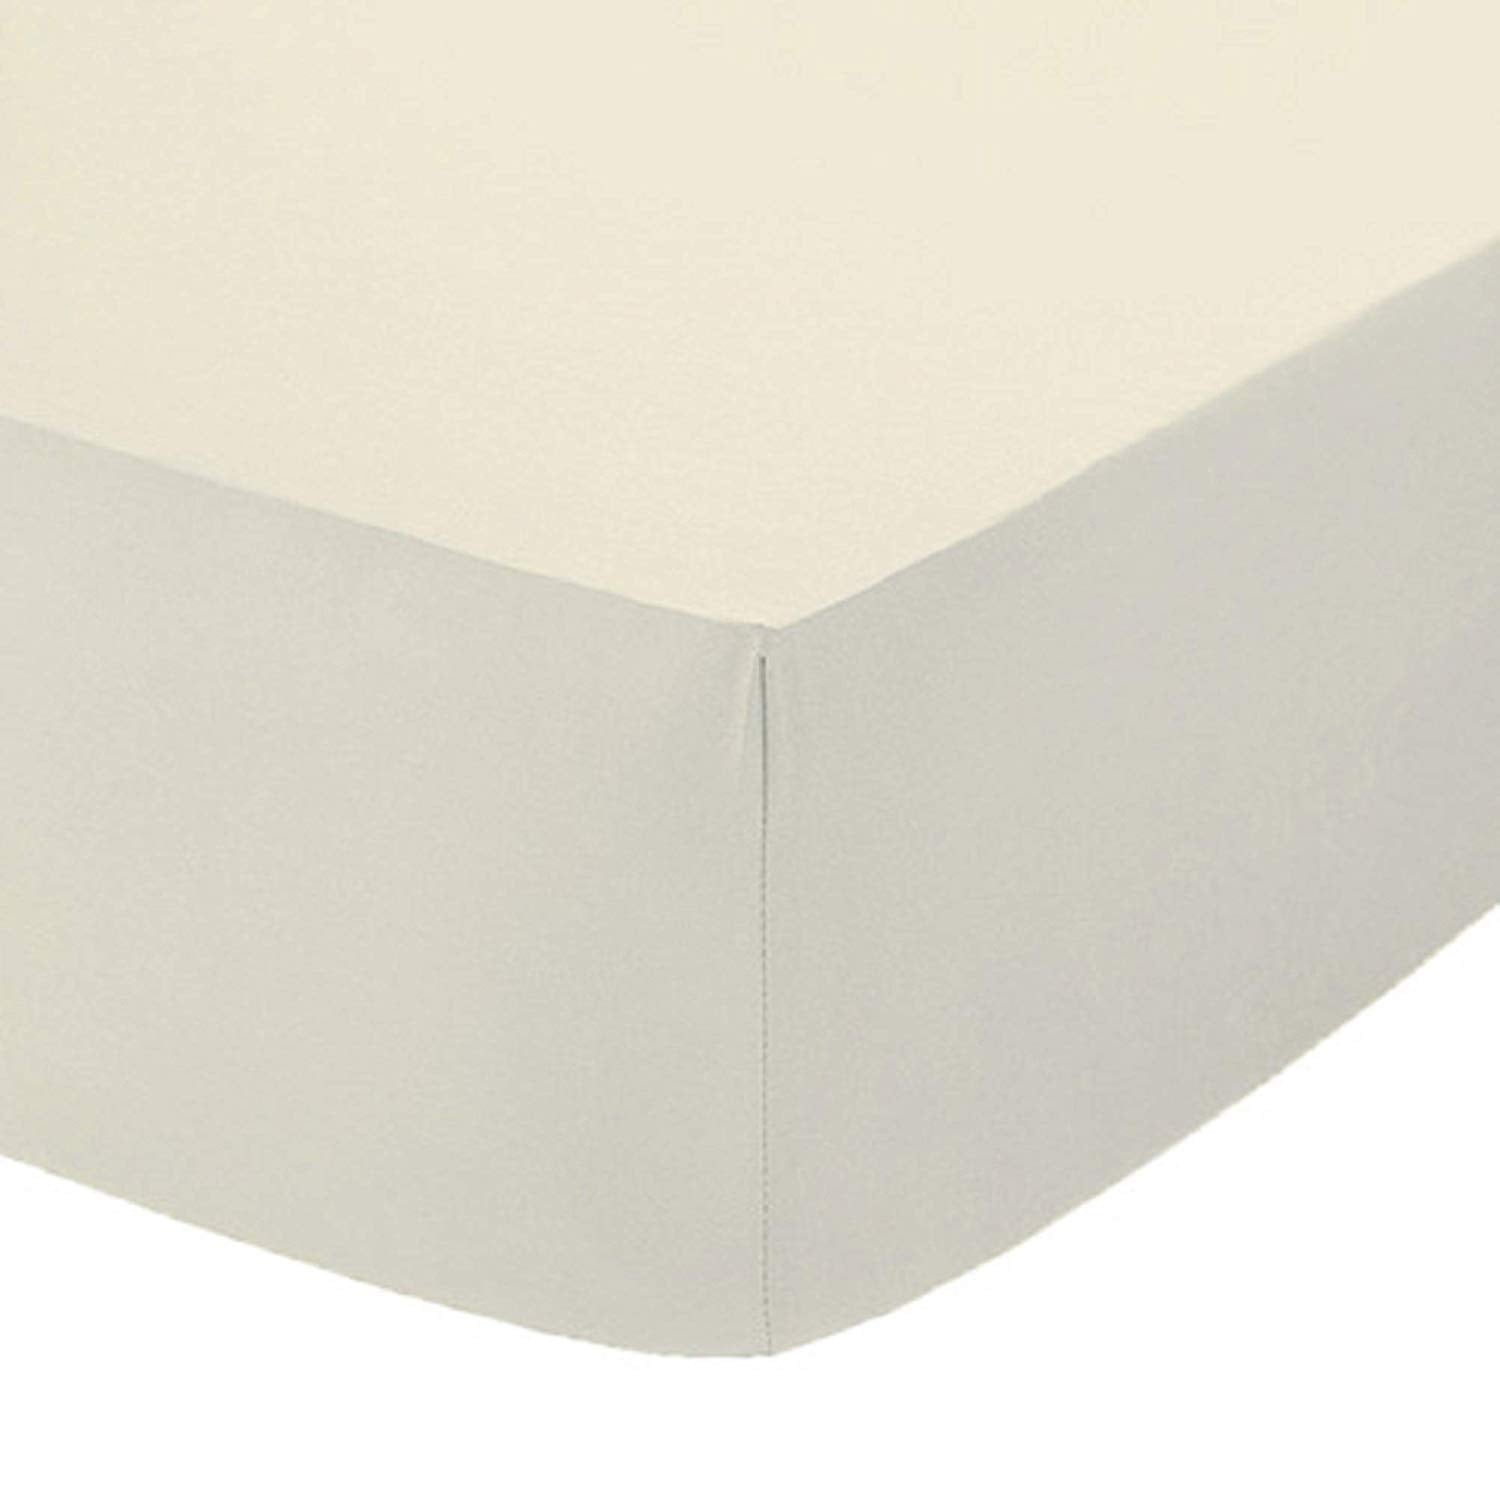 British Home Bedding Percale Extra Deep 16"/40cm Fitted Sheet (Cream, Super King)